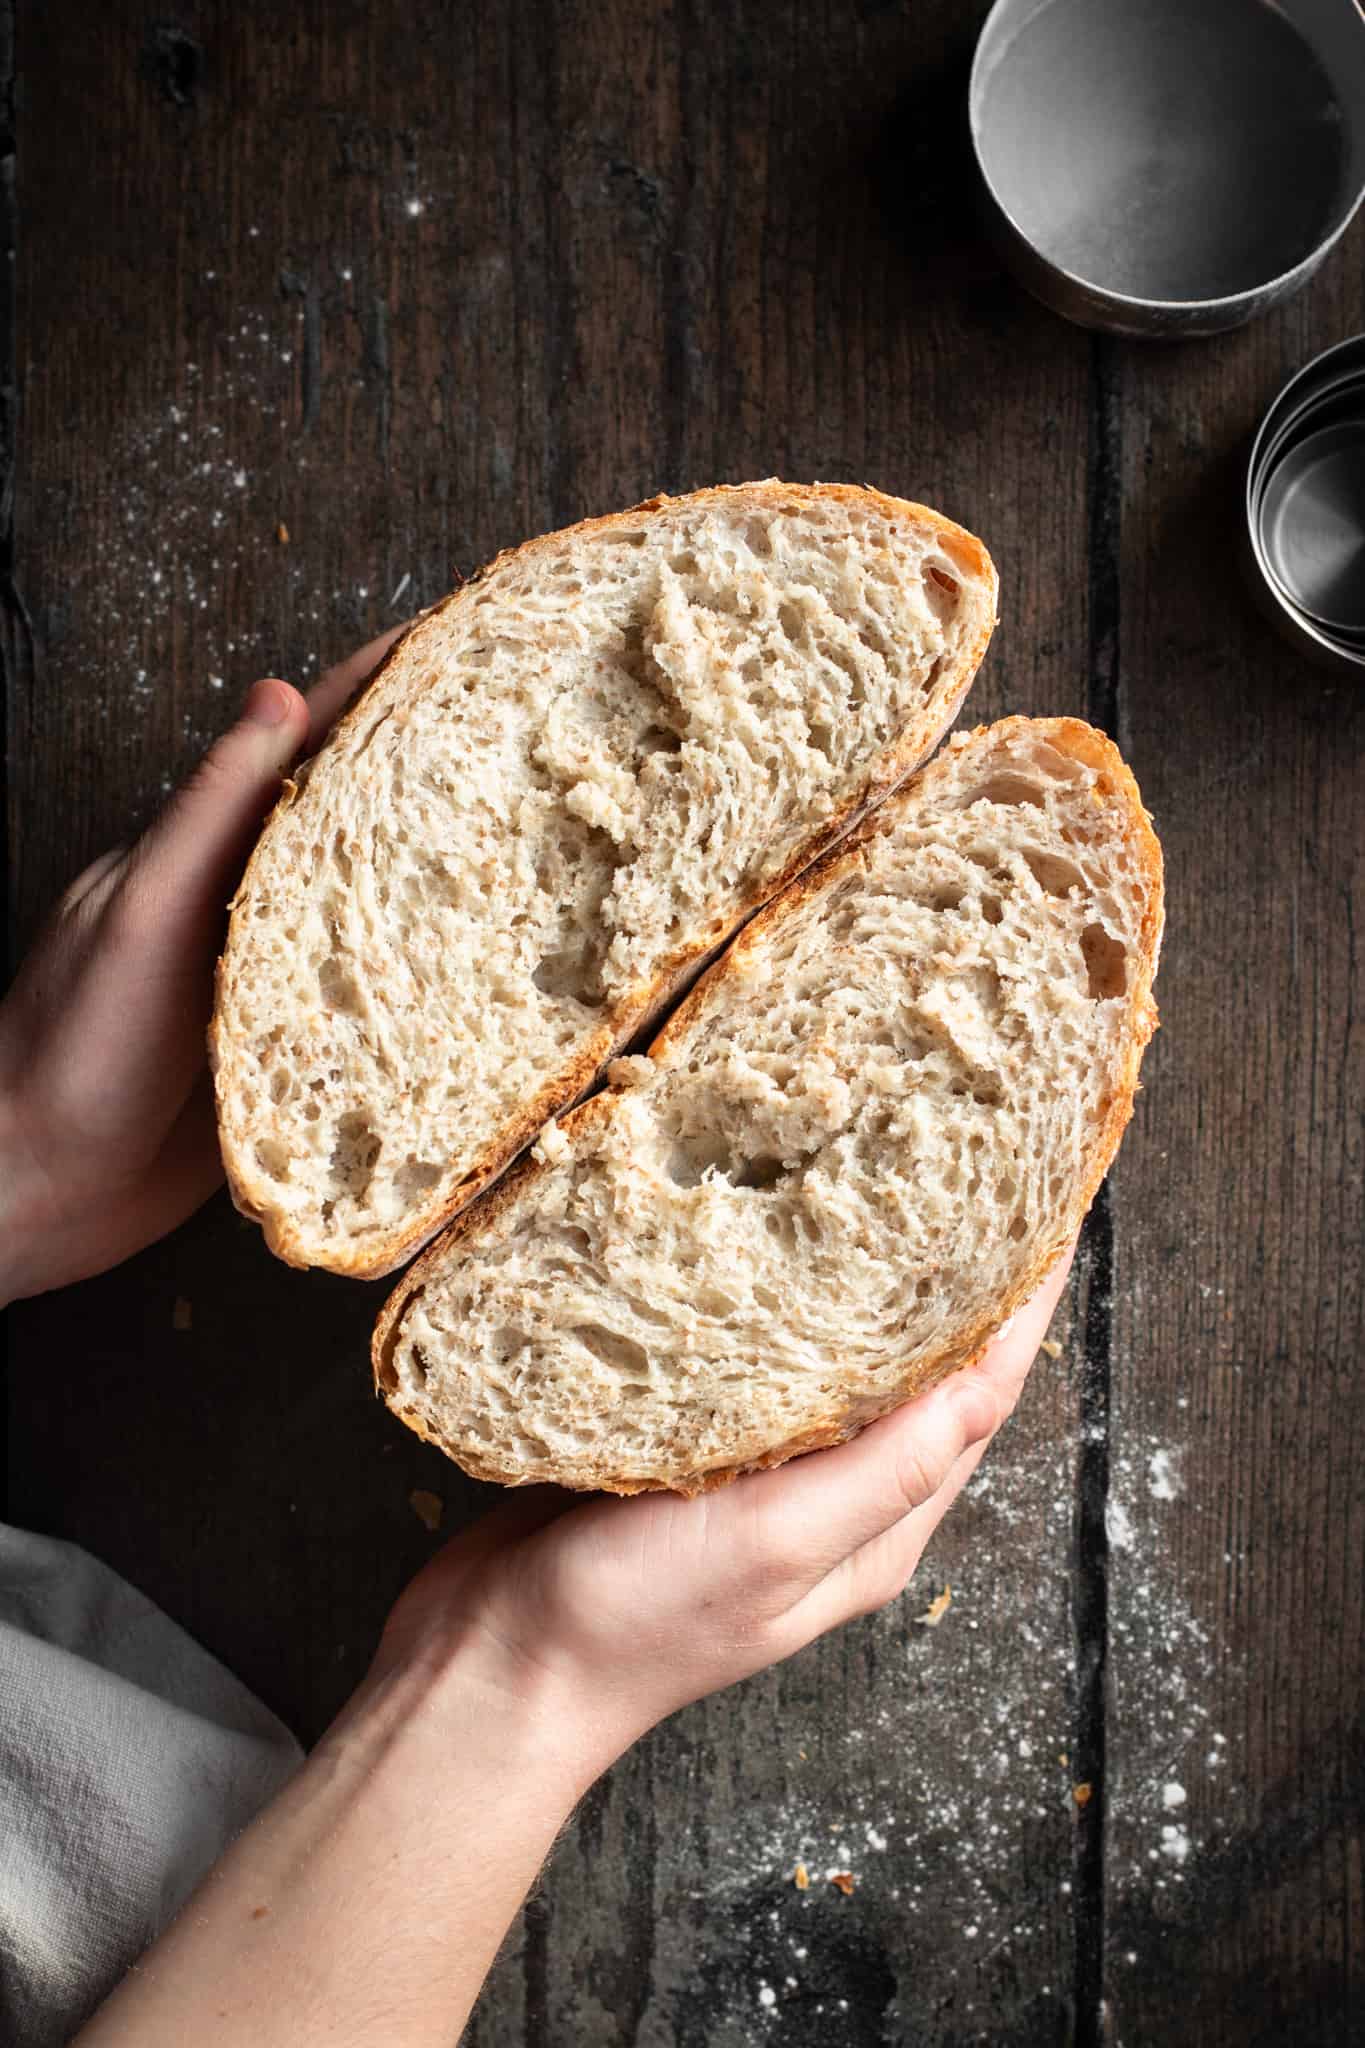 Hands holding whole wheat bread cut in half